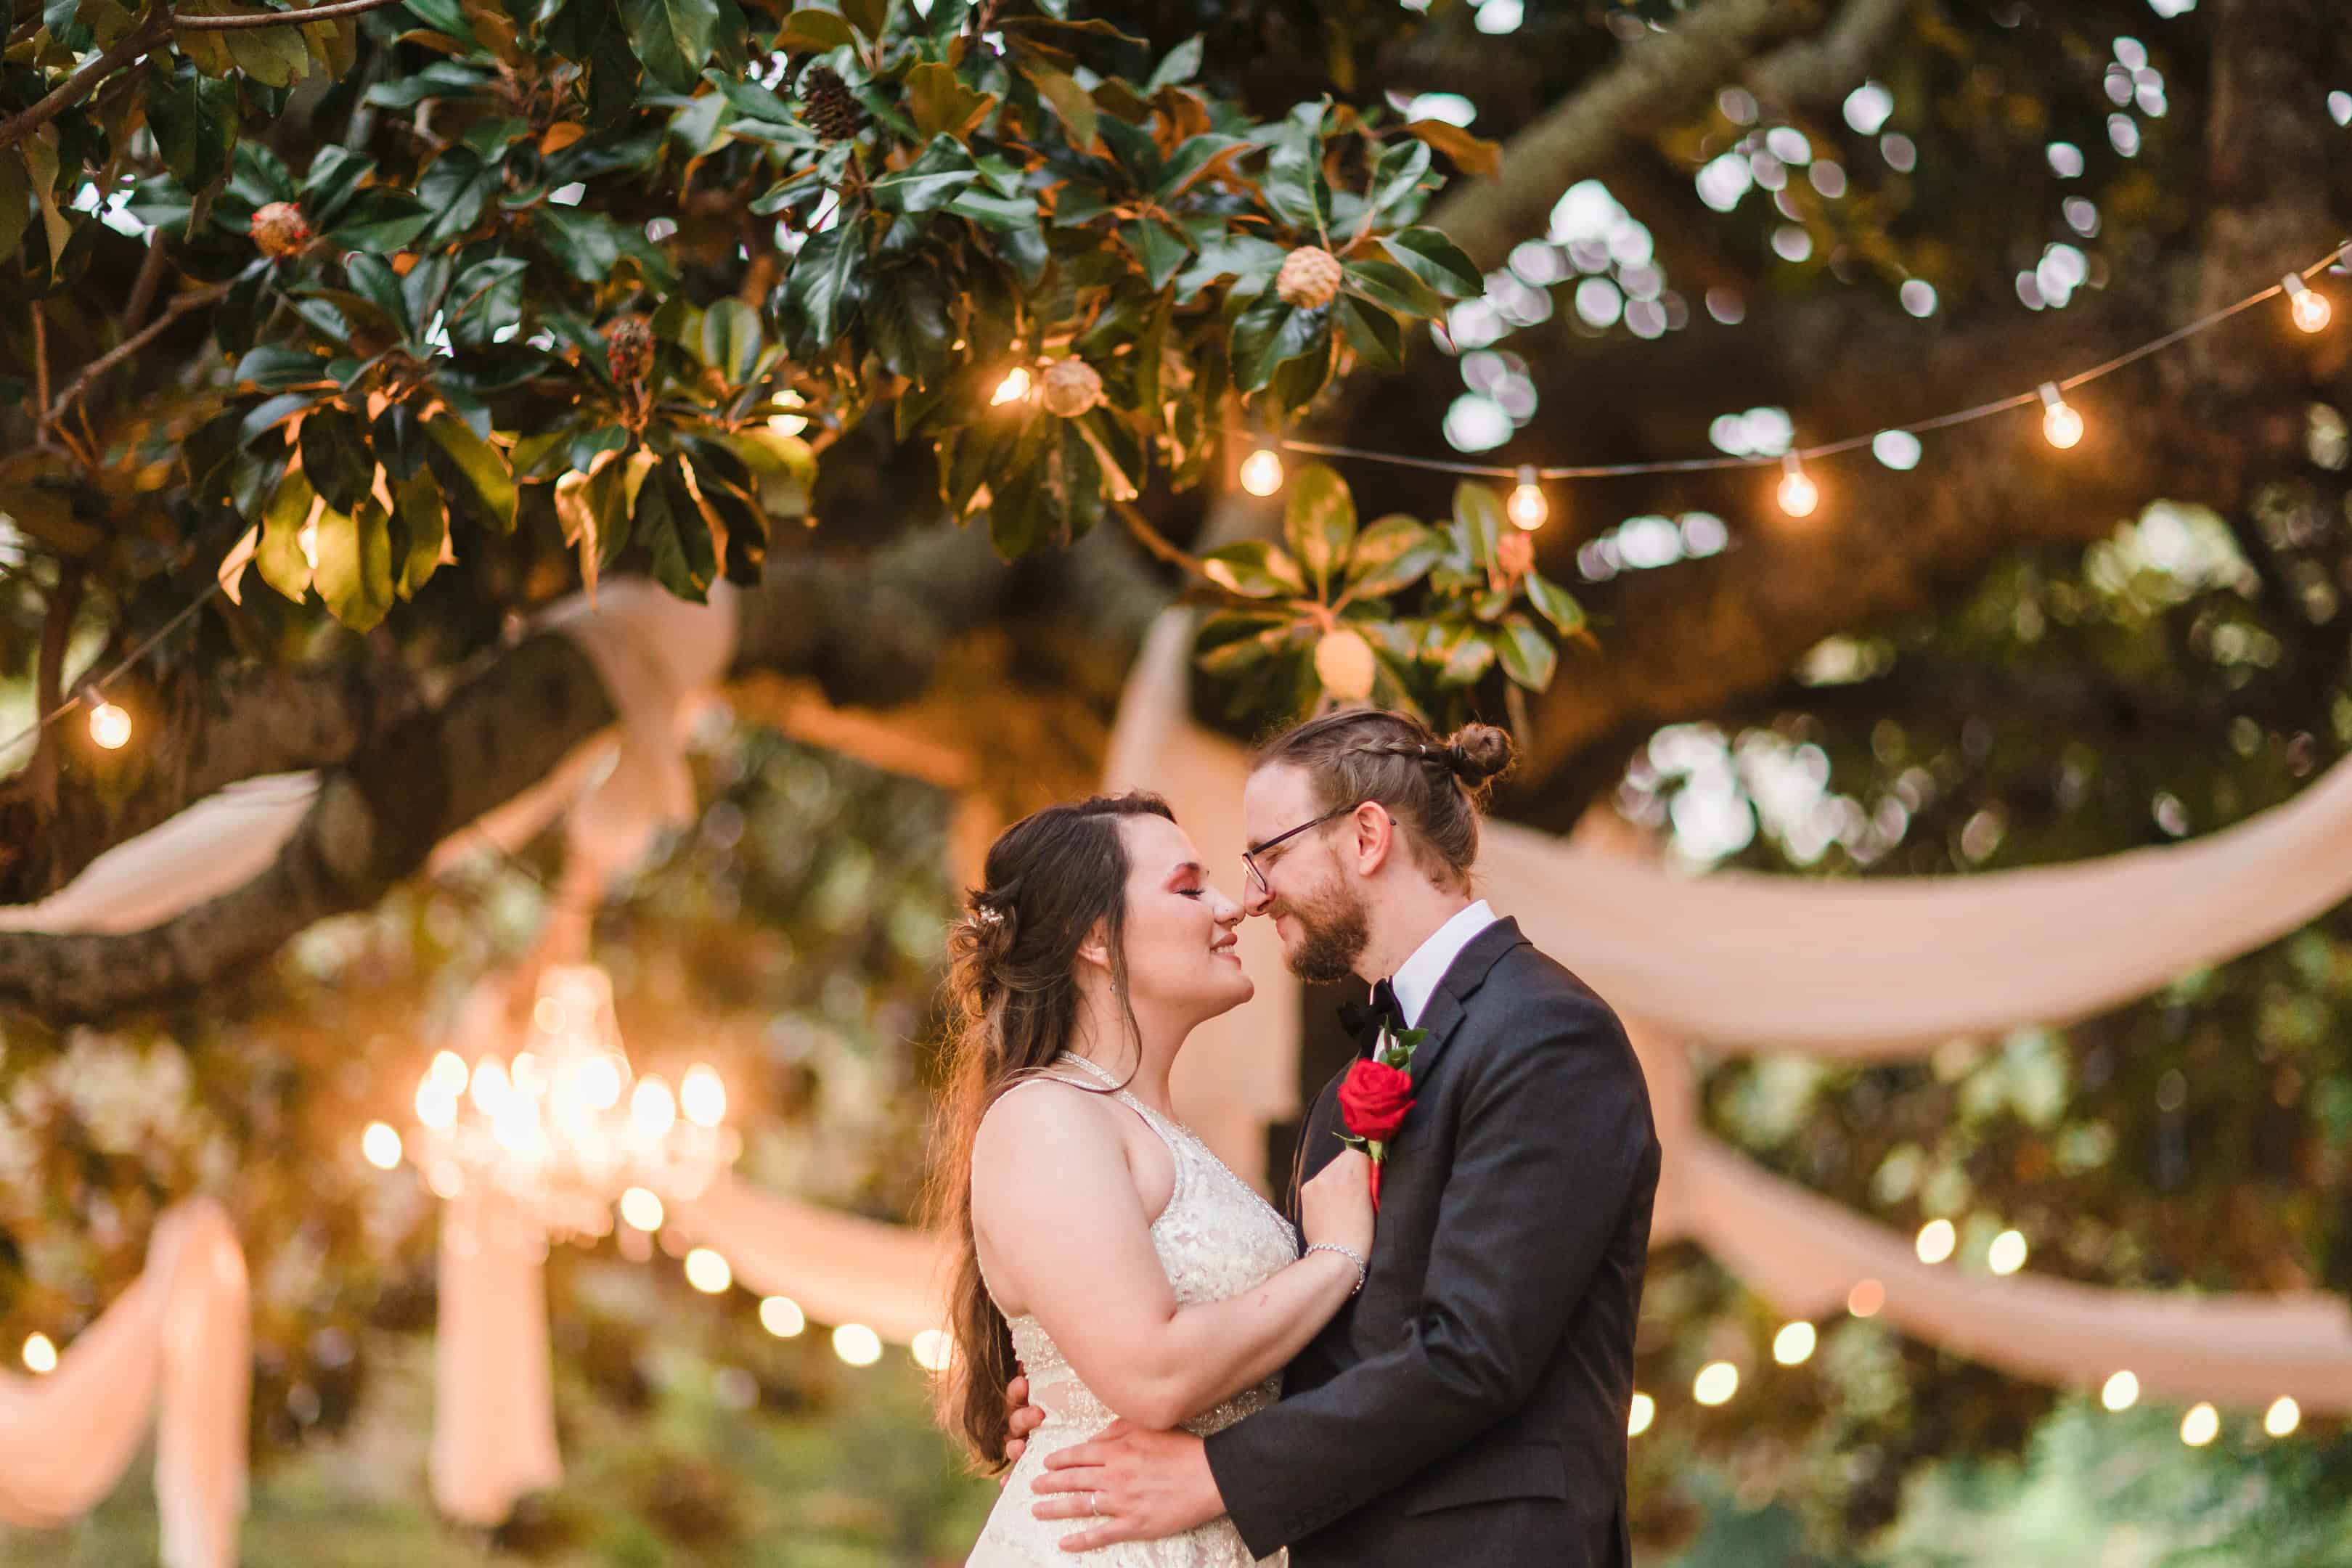 Leanna & Sean - Flawless Fall Wedding in middle Tennessee